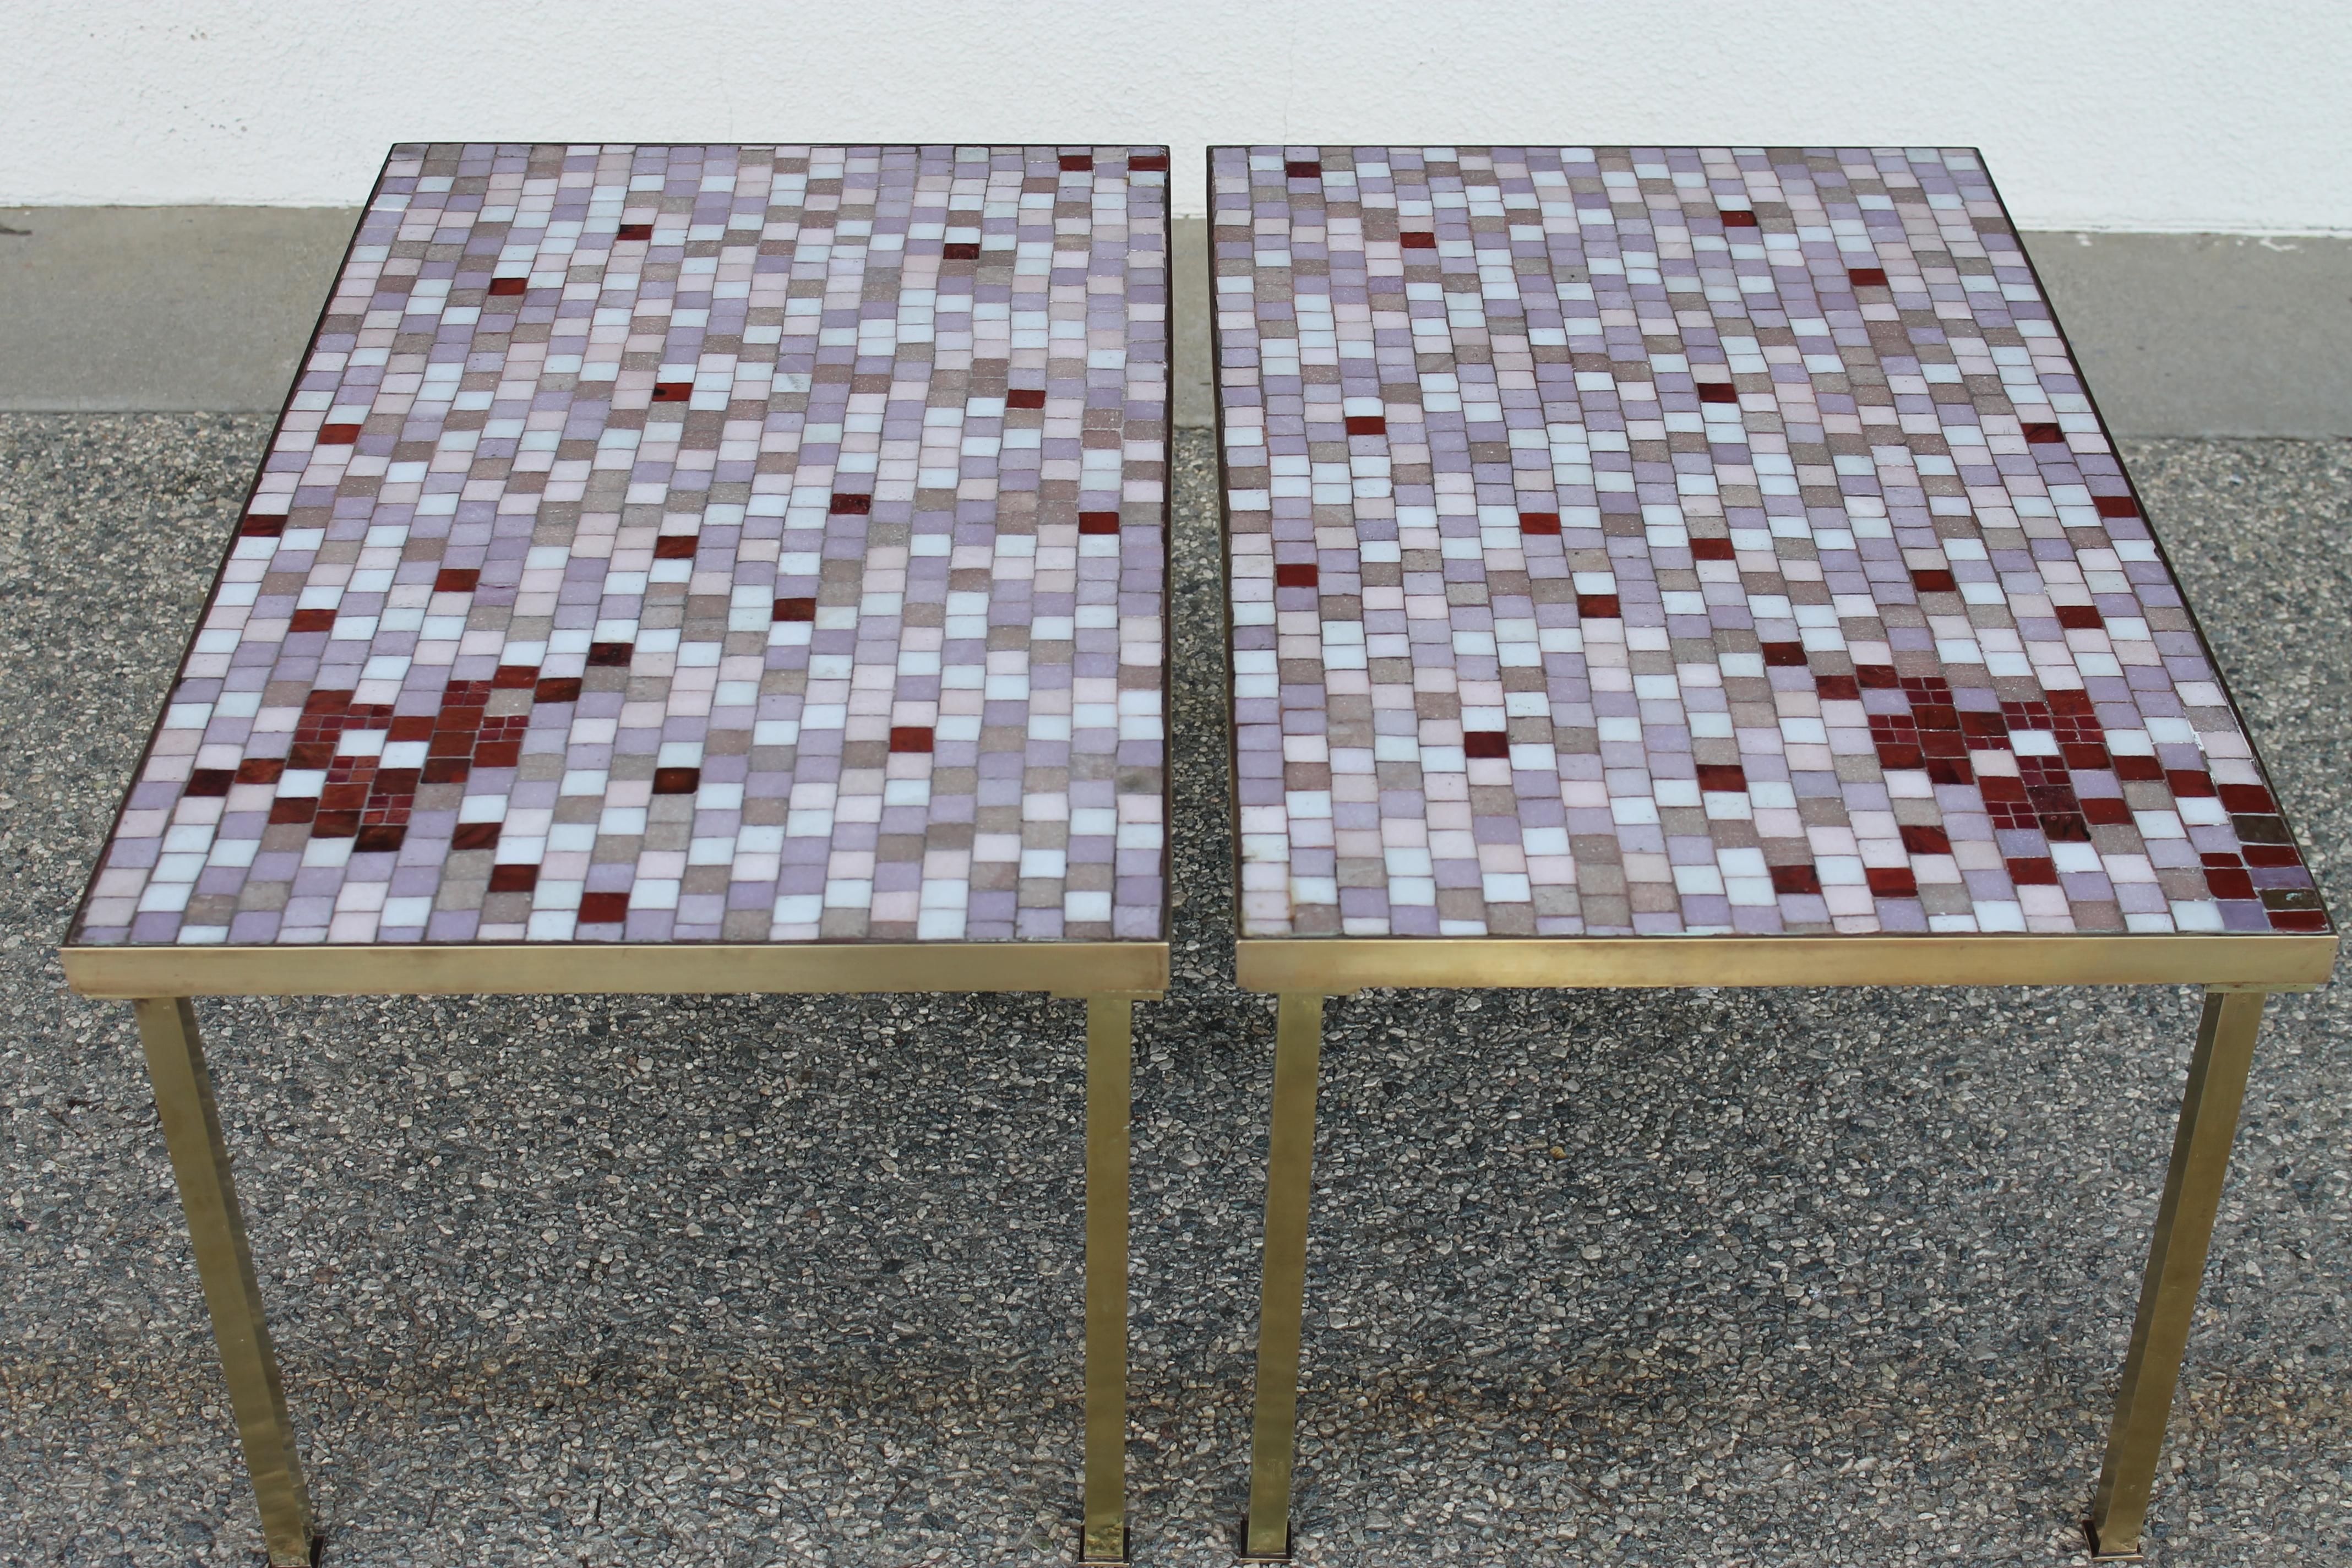 Mid-Century Modern Pair of Italian Glass Tile Tables in the style of Harvey Probber